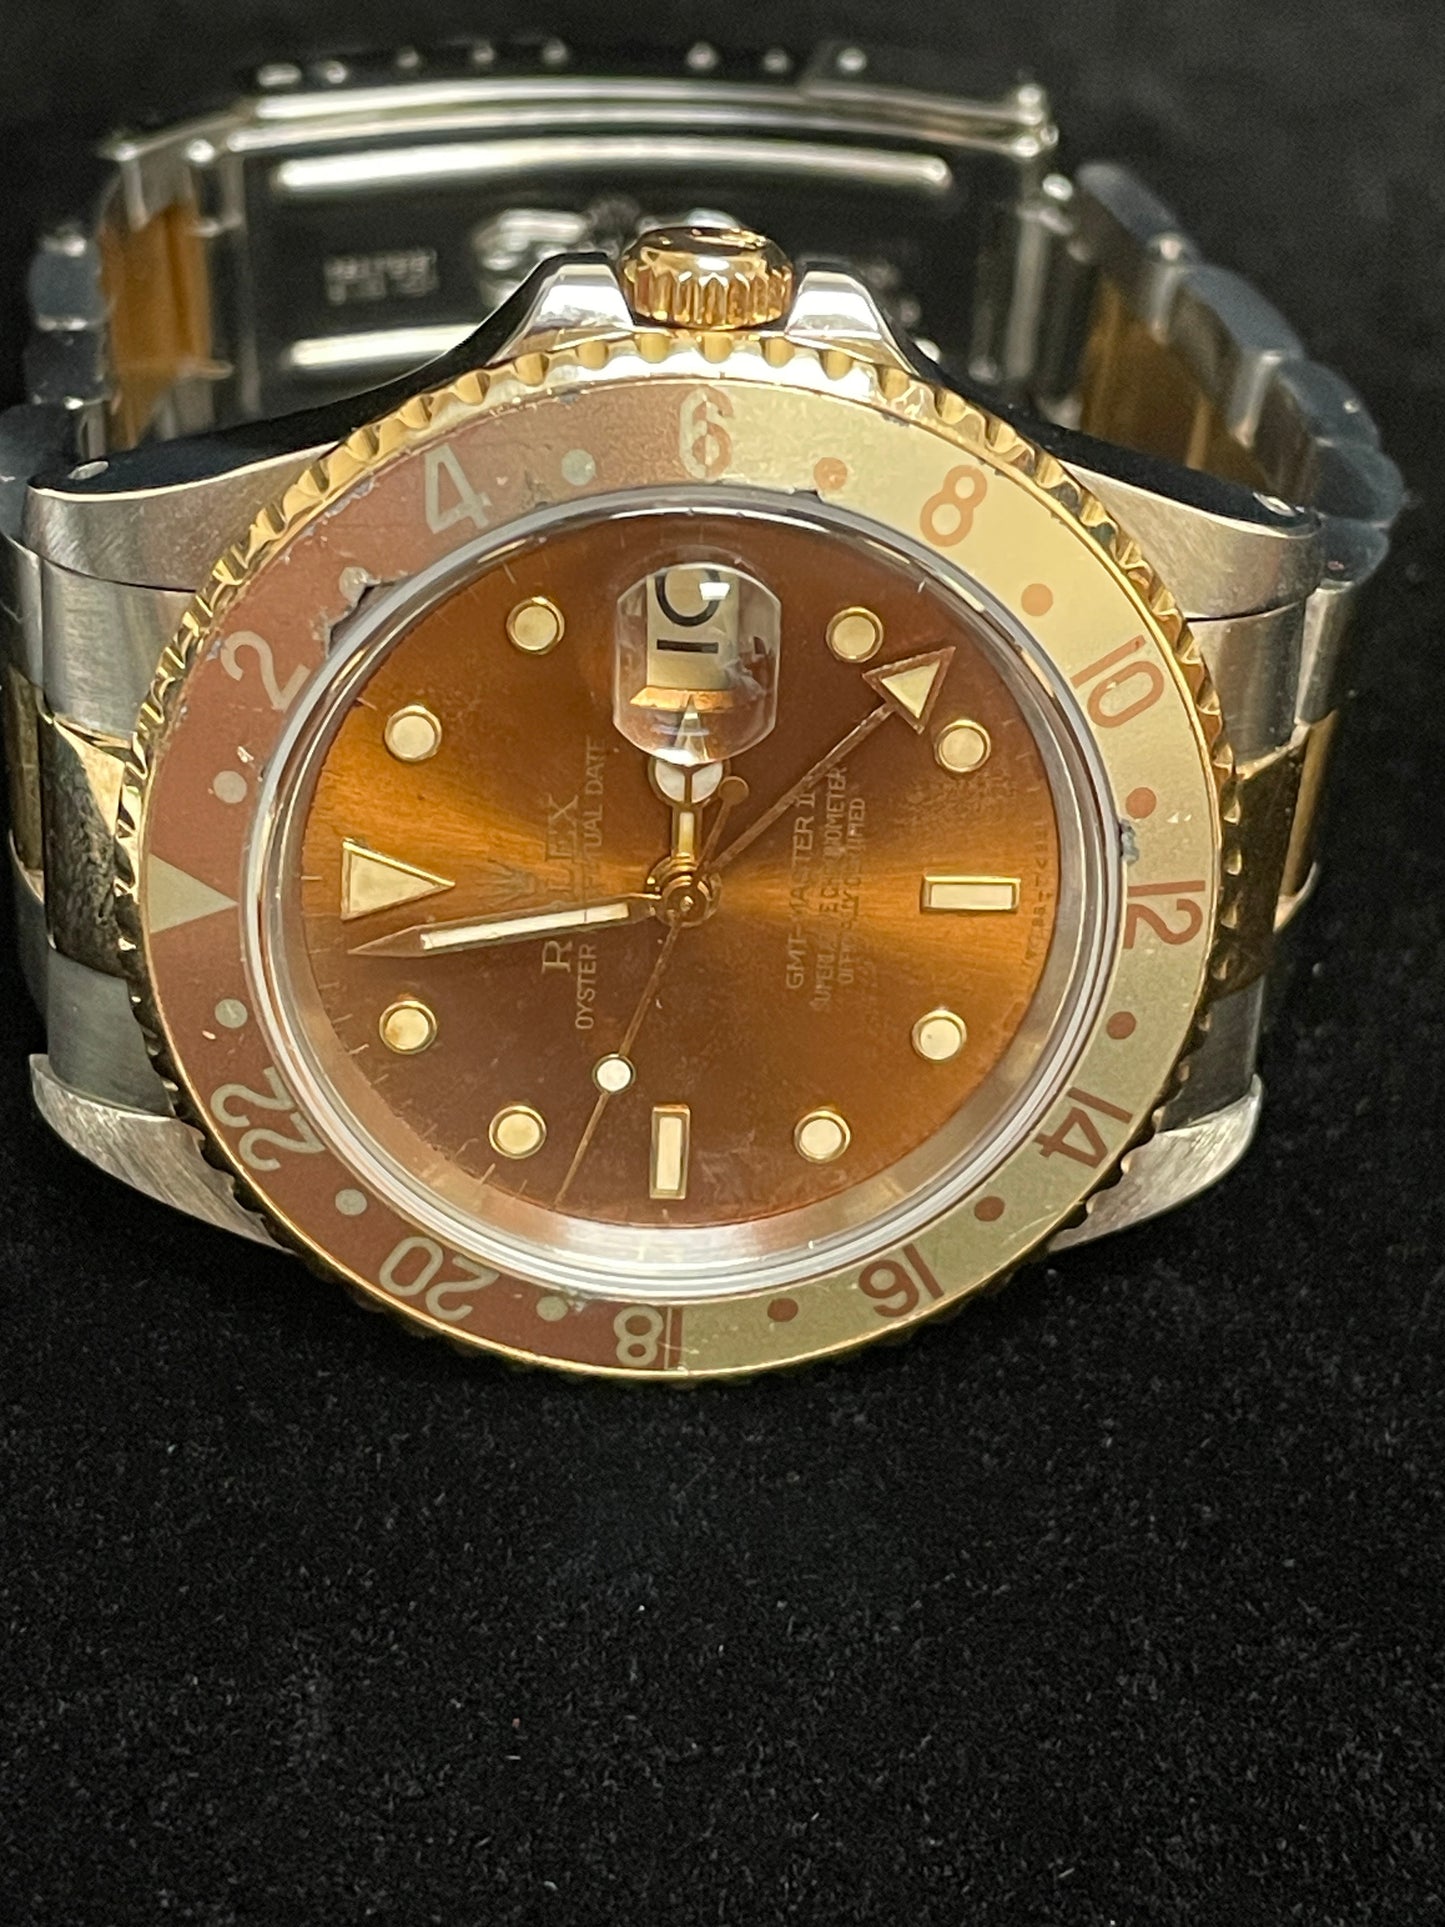 1991 Rolex GMT-Master II 16713 Rootbeer Dial TT Oyster No Papers 40mm